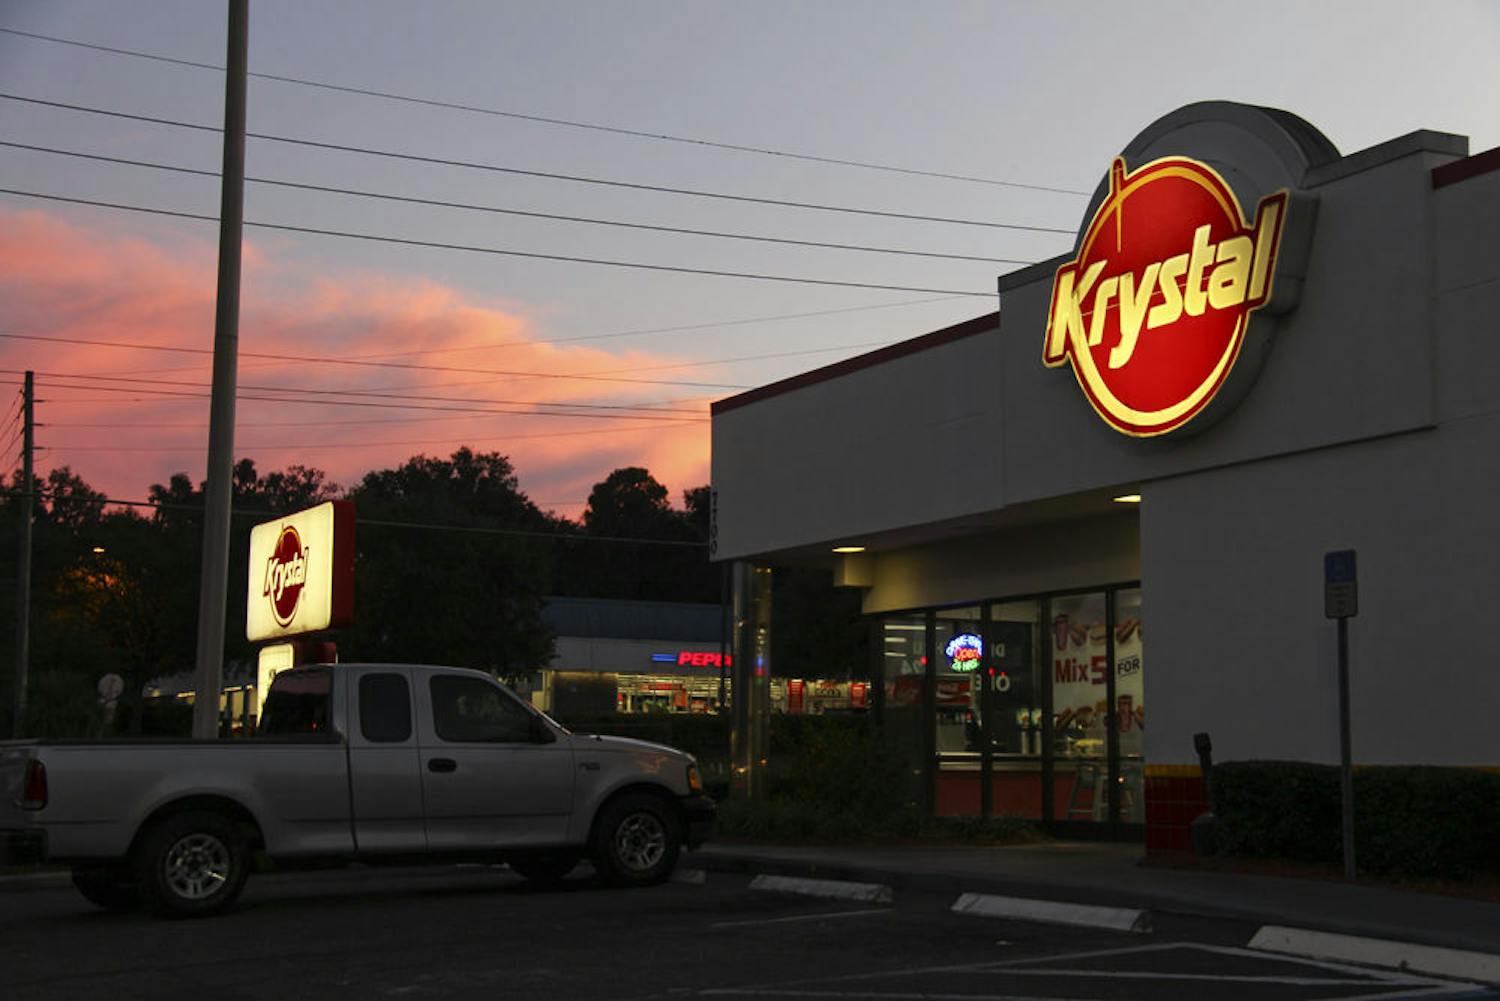 Krystal celebrated its 82nd birthday Tuesday by offering 82-cent hamburgers and a small drink throughout the day.